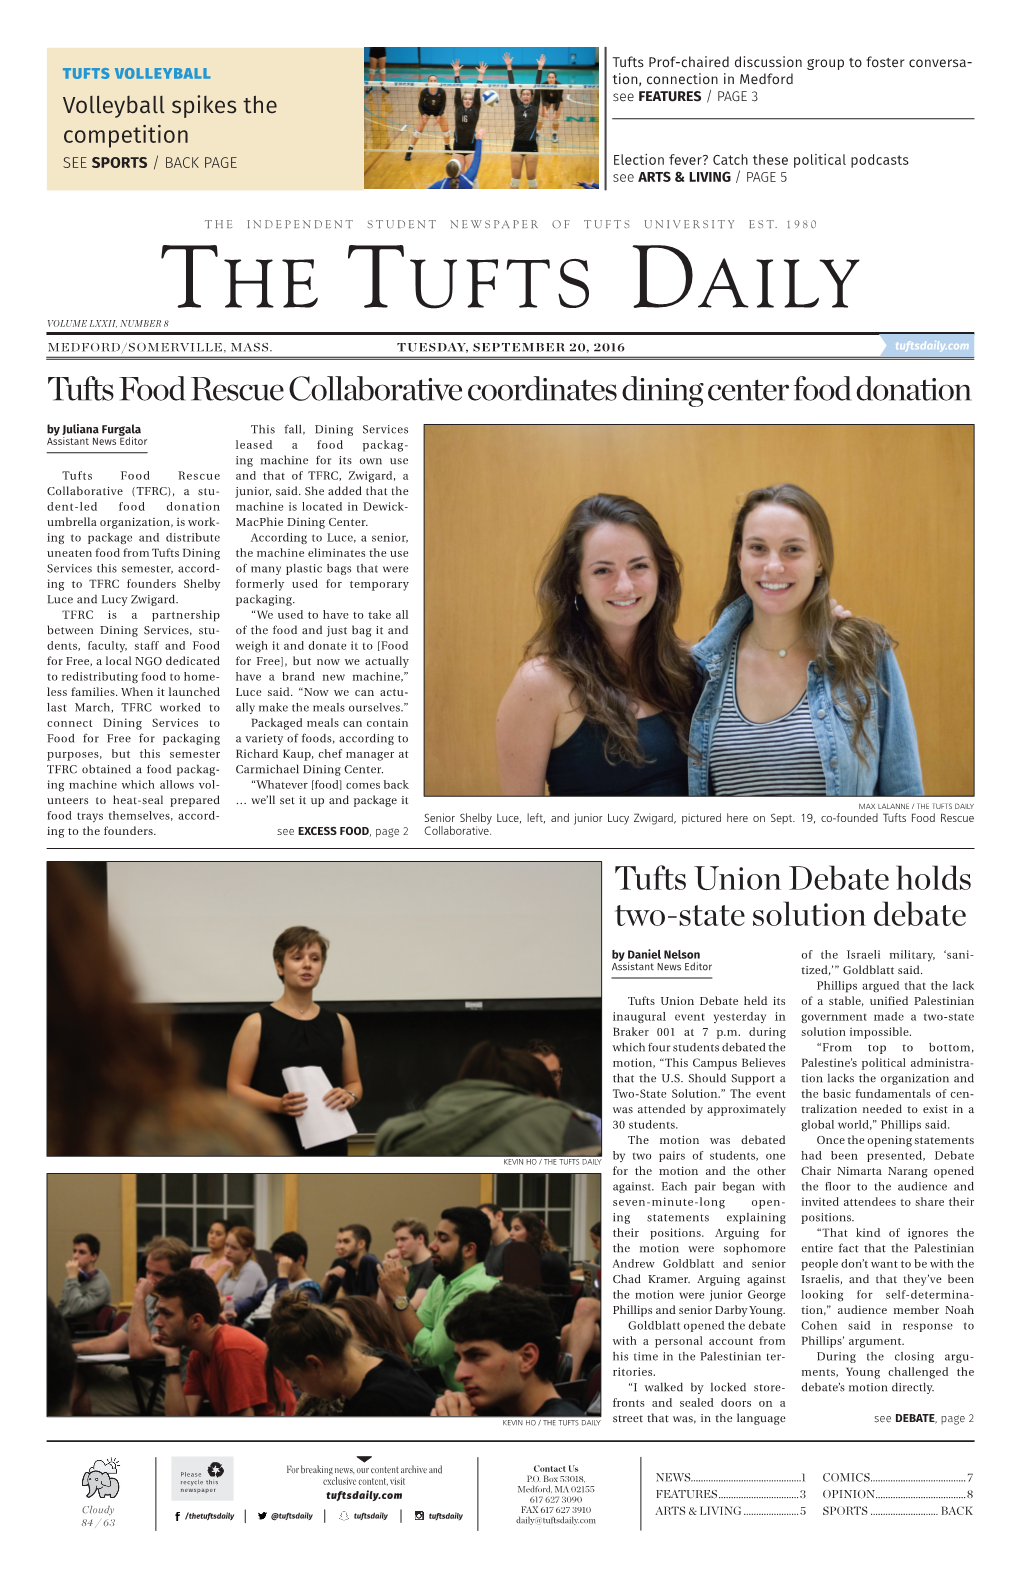 The Tufts Daily Volume Lxxii, Number 8